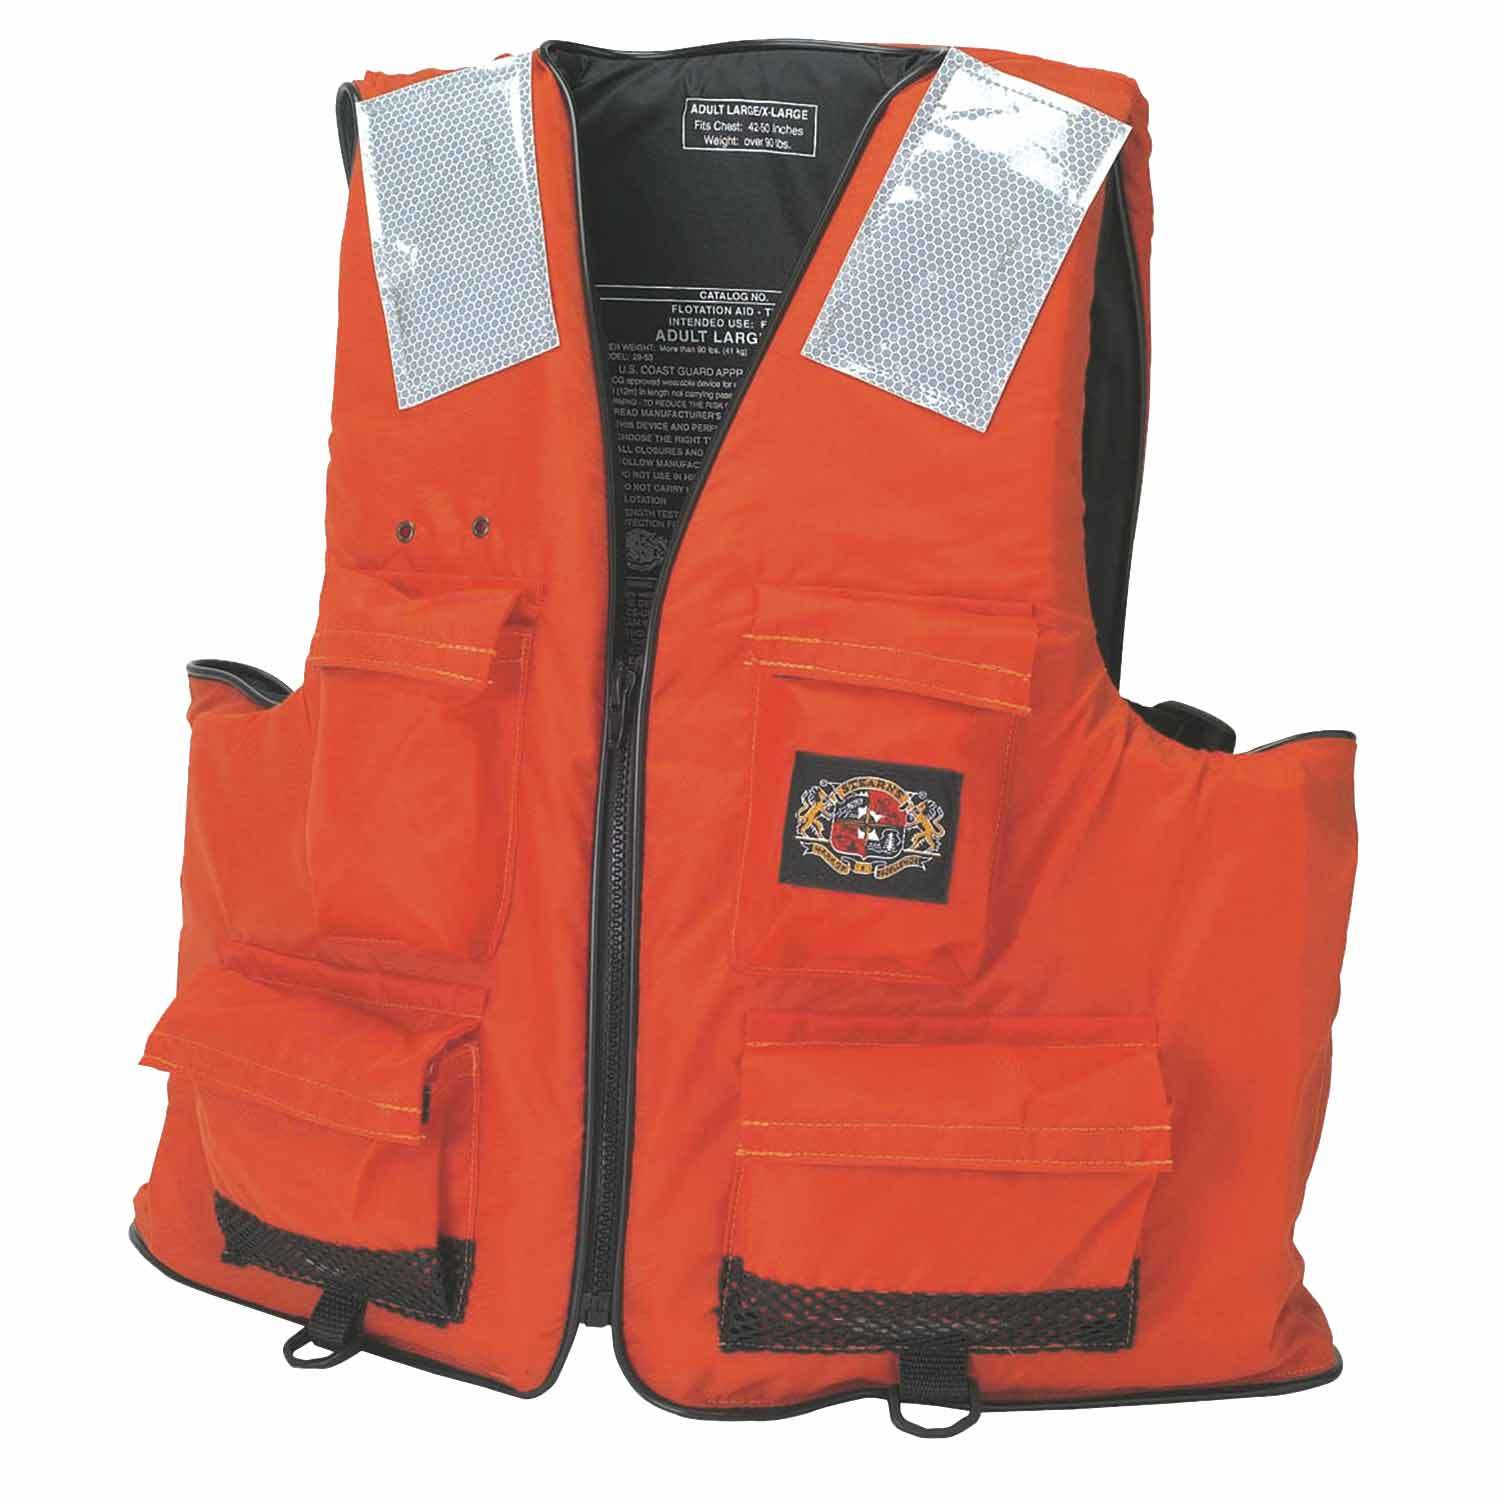 Reflective Safety Jackets - Reflective Safety Jackets buyers, suppliers,  importers, exporters and manufacturers - Latest price and trends